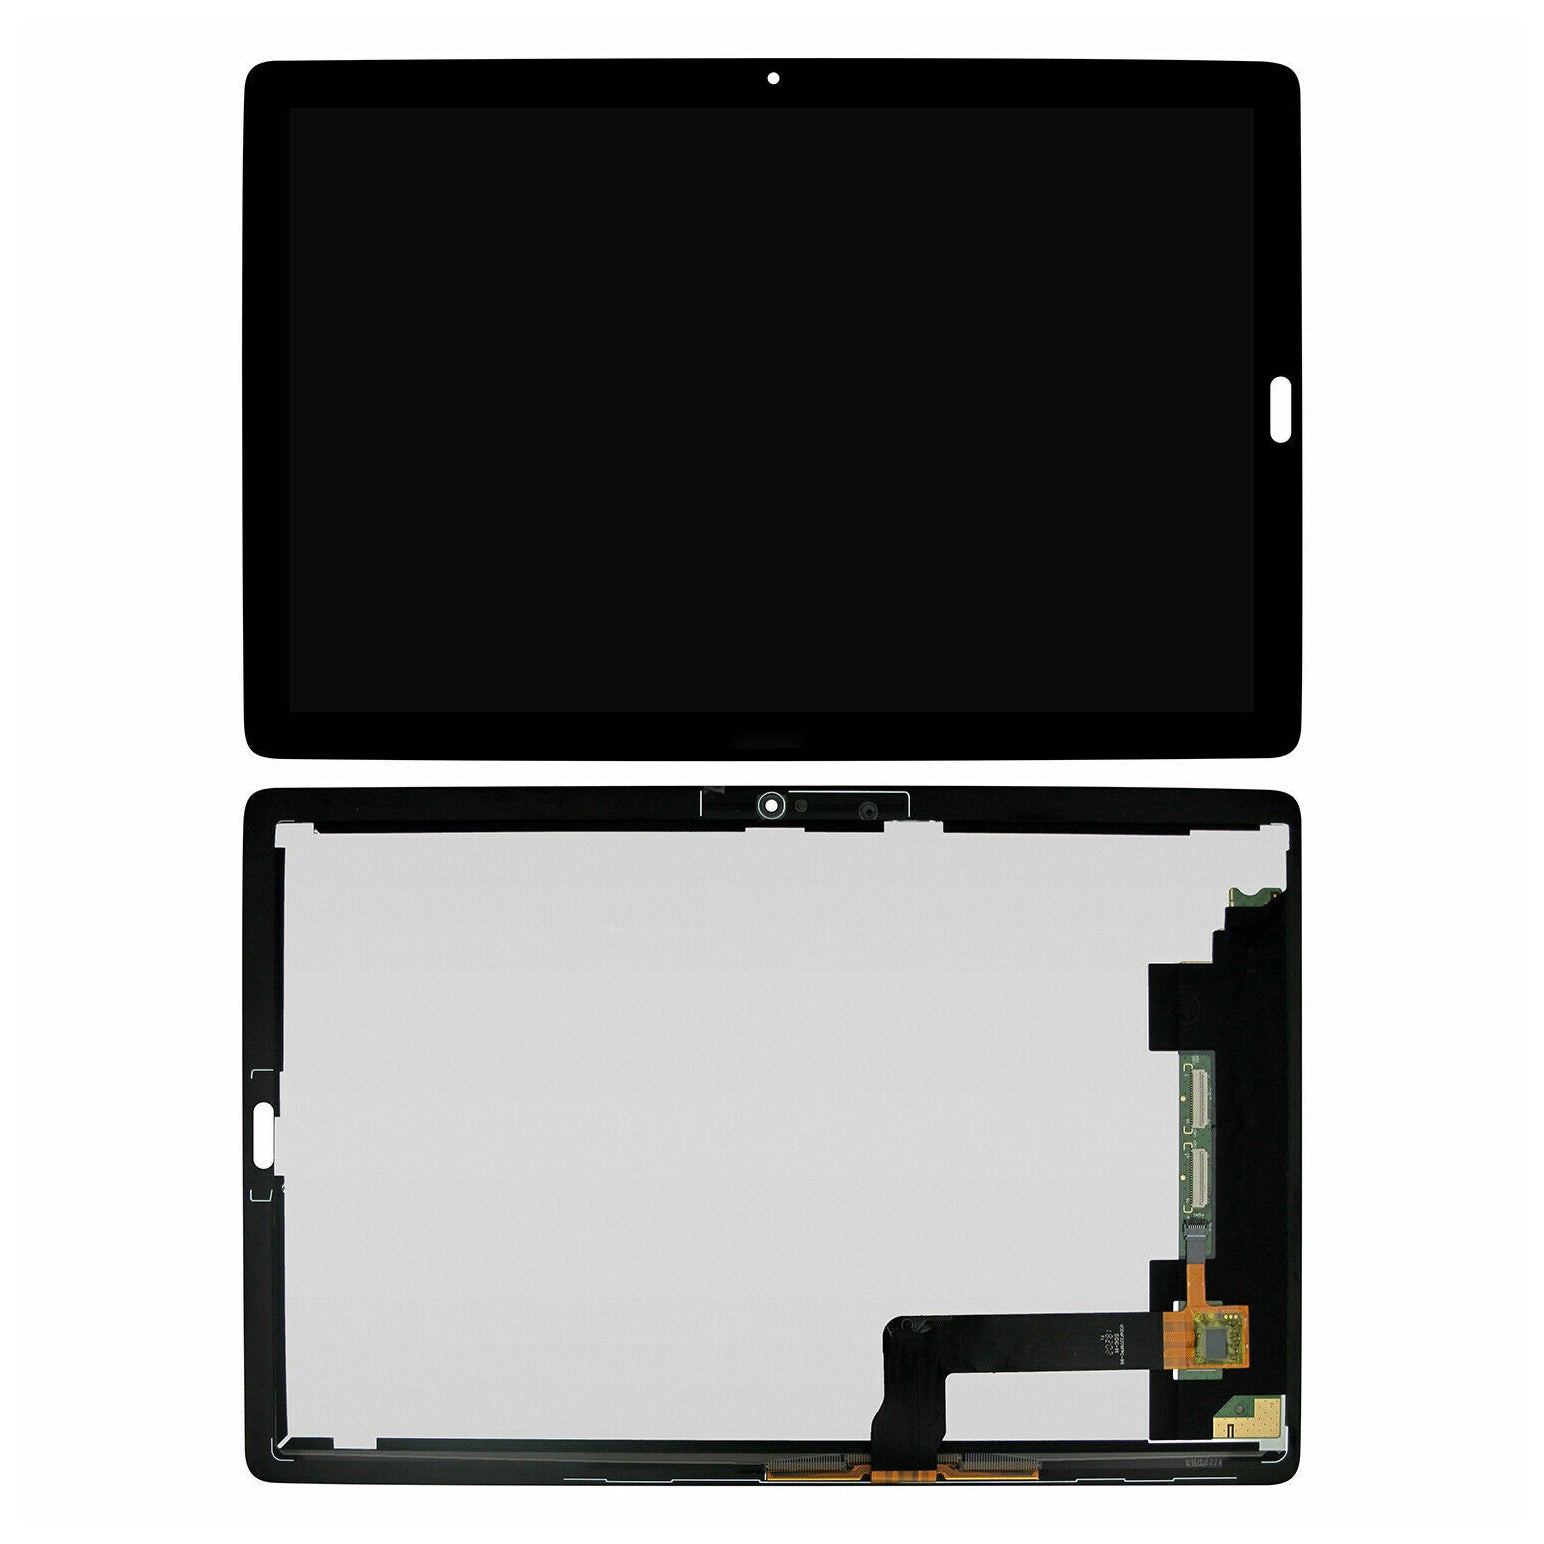 Replacement LCD Screen For Huawei MediaPad M5 10 Display Assembly - Black